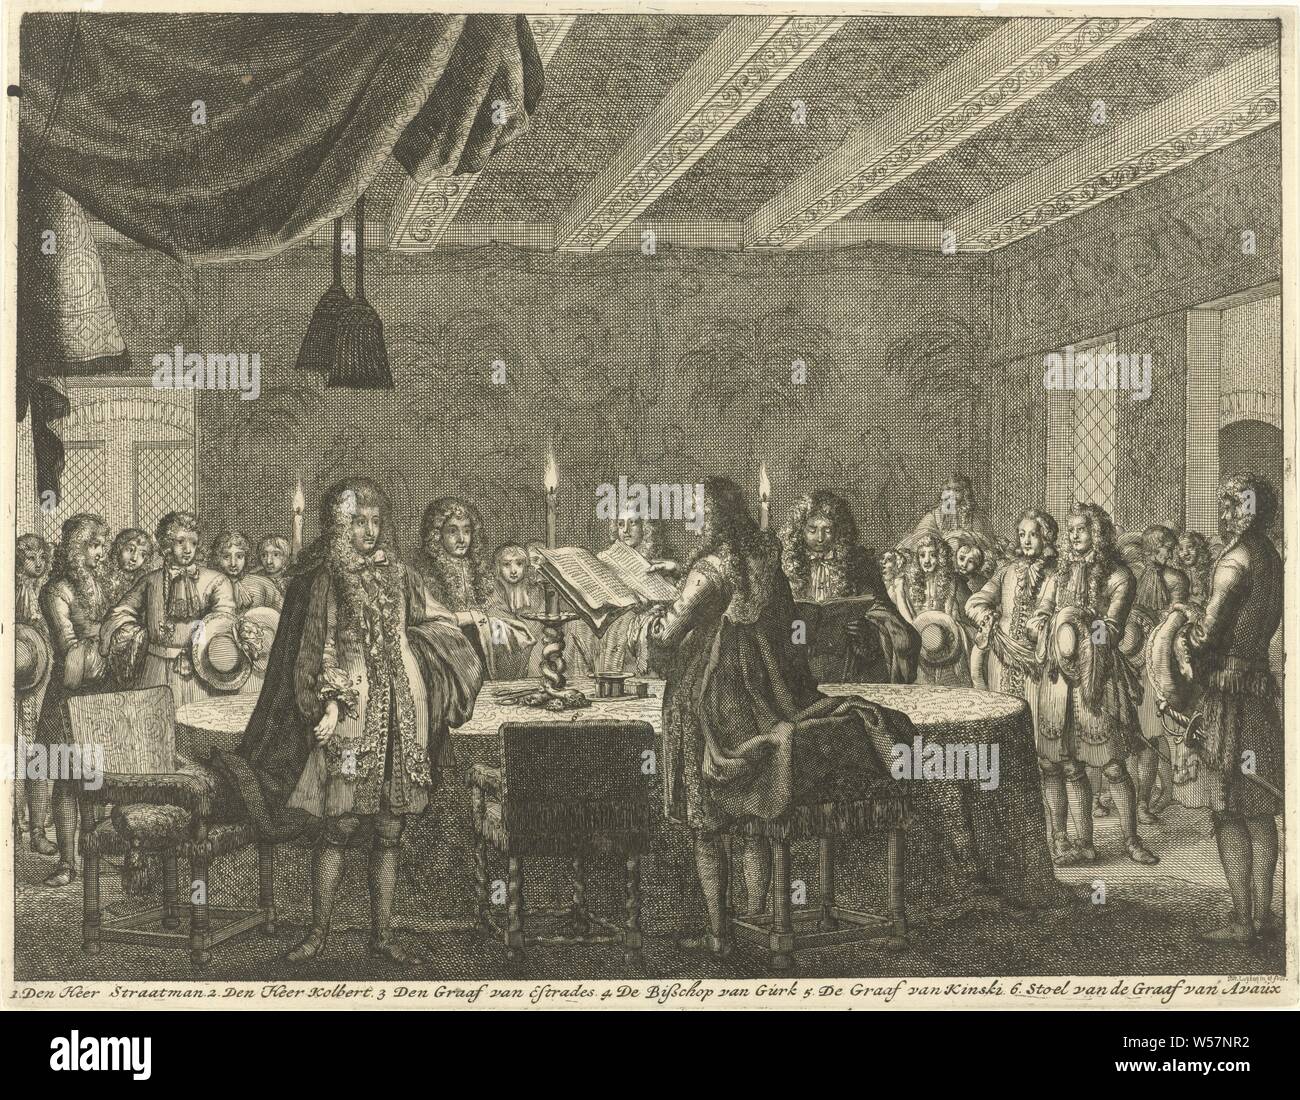 The signing of the peace treaty between France and the German Emperor, 5 February 1679, The signing of the peace treaty between France and the German Emperor in the city hall of Nijmegen at ten o'clock ' evening February 5, 1679. Interior with a group of men standing around a table by candlelight. Among the negotiators are: Graf Strattmann, Marquis de Croissy (Colbert), Comte d'Estrades, the Bishop of Gurk, Graf Kinsky, and the empty chair of the Comte d'Avaux. In the margin the legend 1-5, signing of peace treaty, concluding the peace, City Hall, Theodor Alethaeus Heinrich, Graf Strattmann Stock Photo